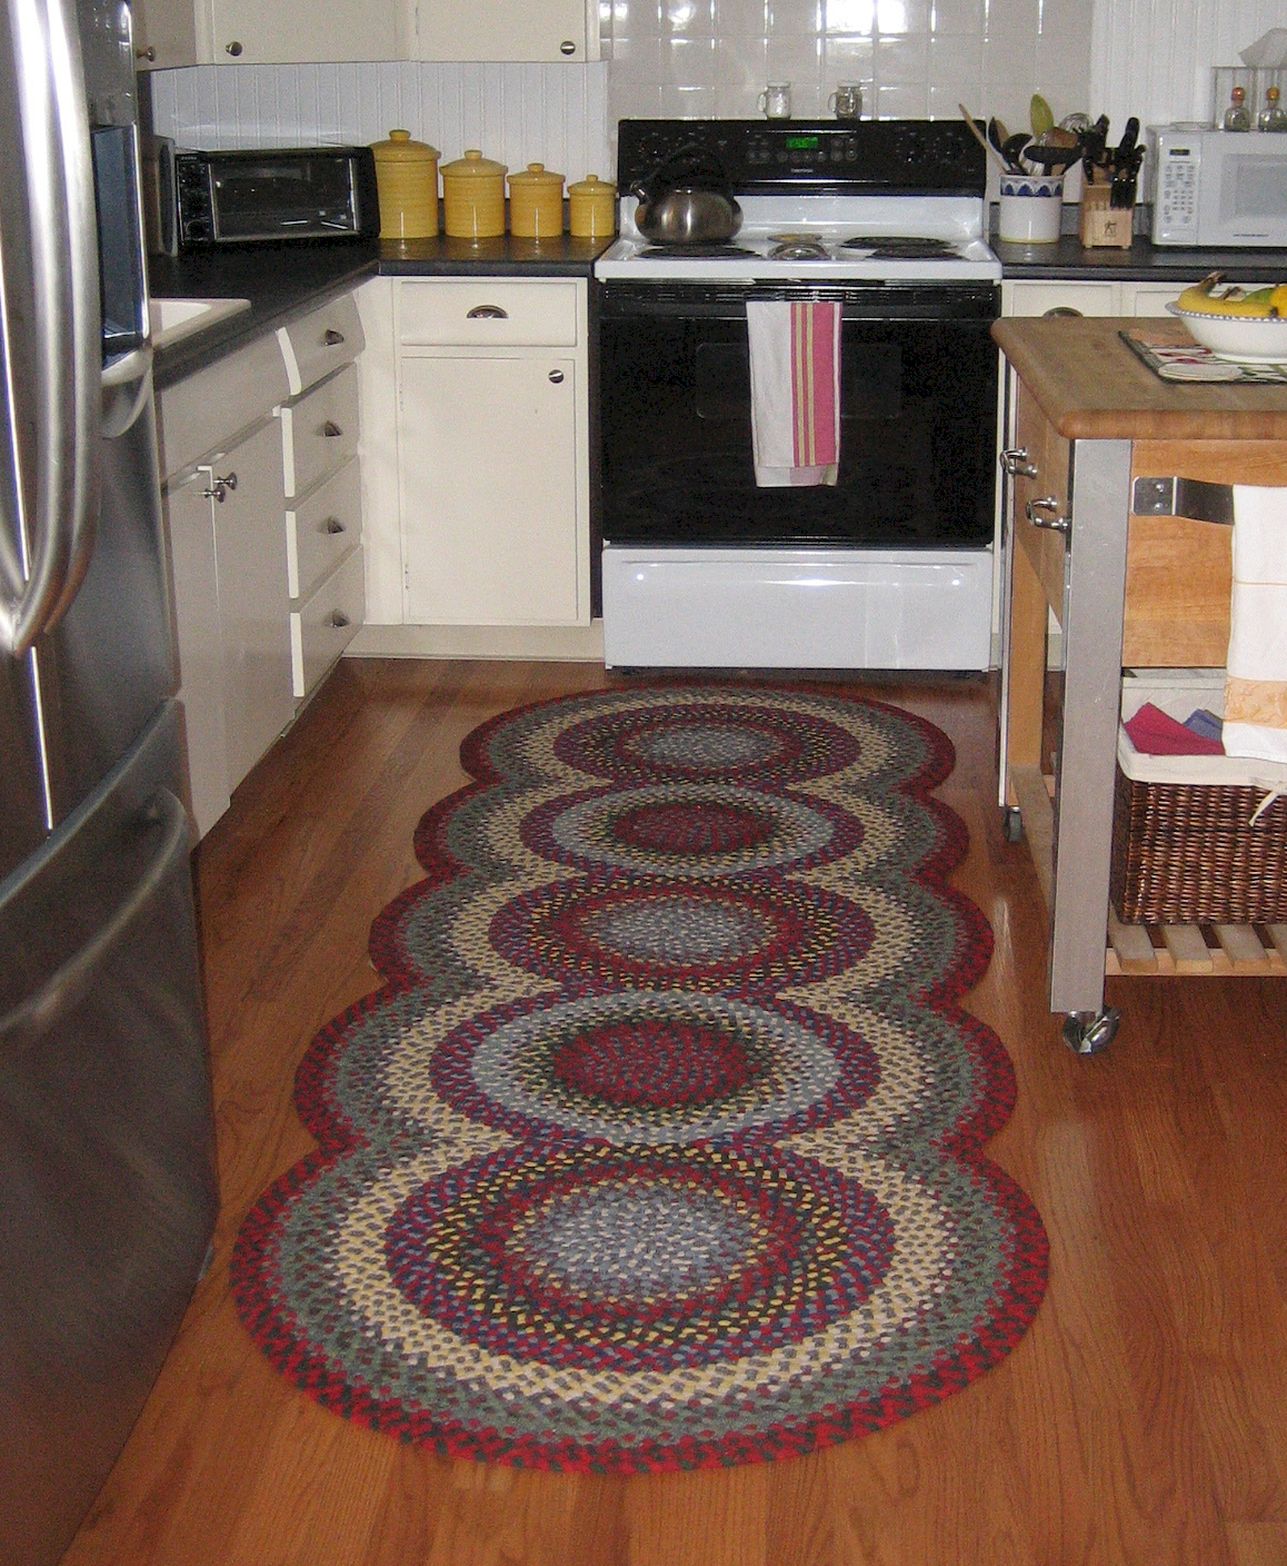 Kitchen Rugs And Mats photo - 1